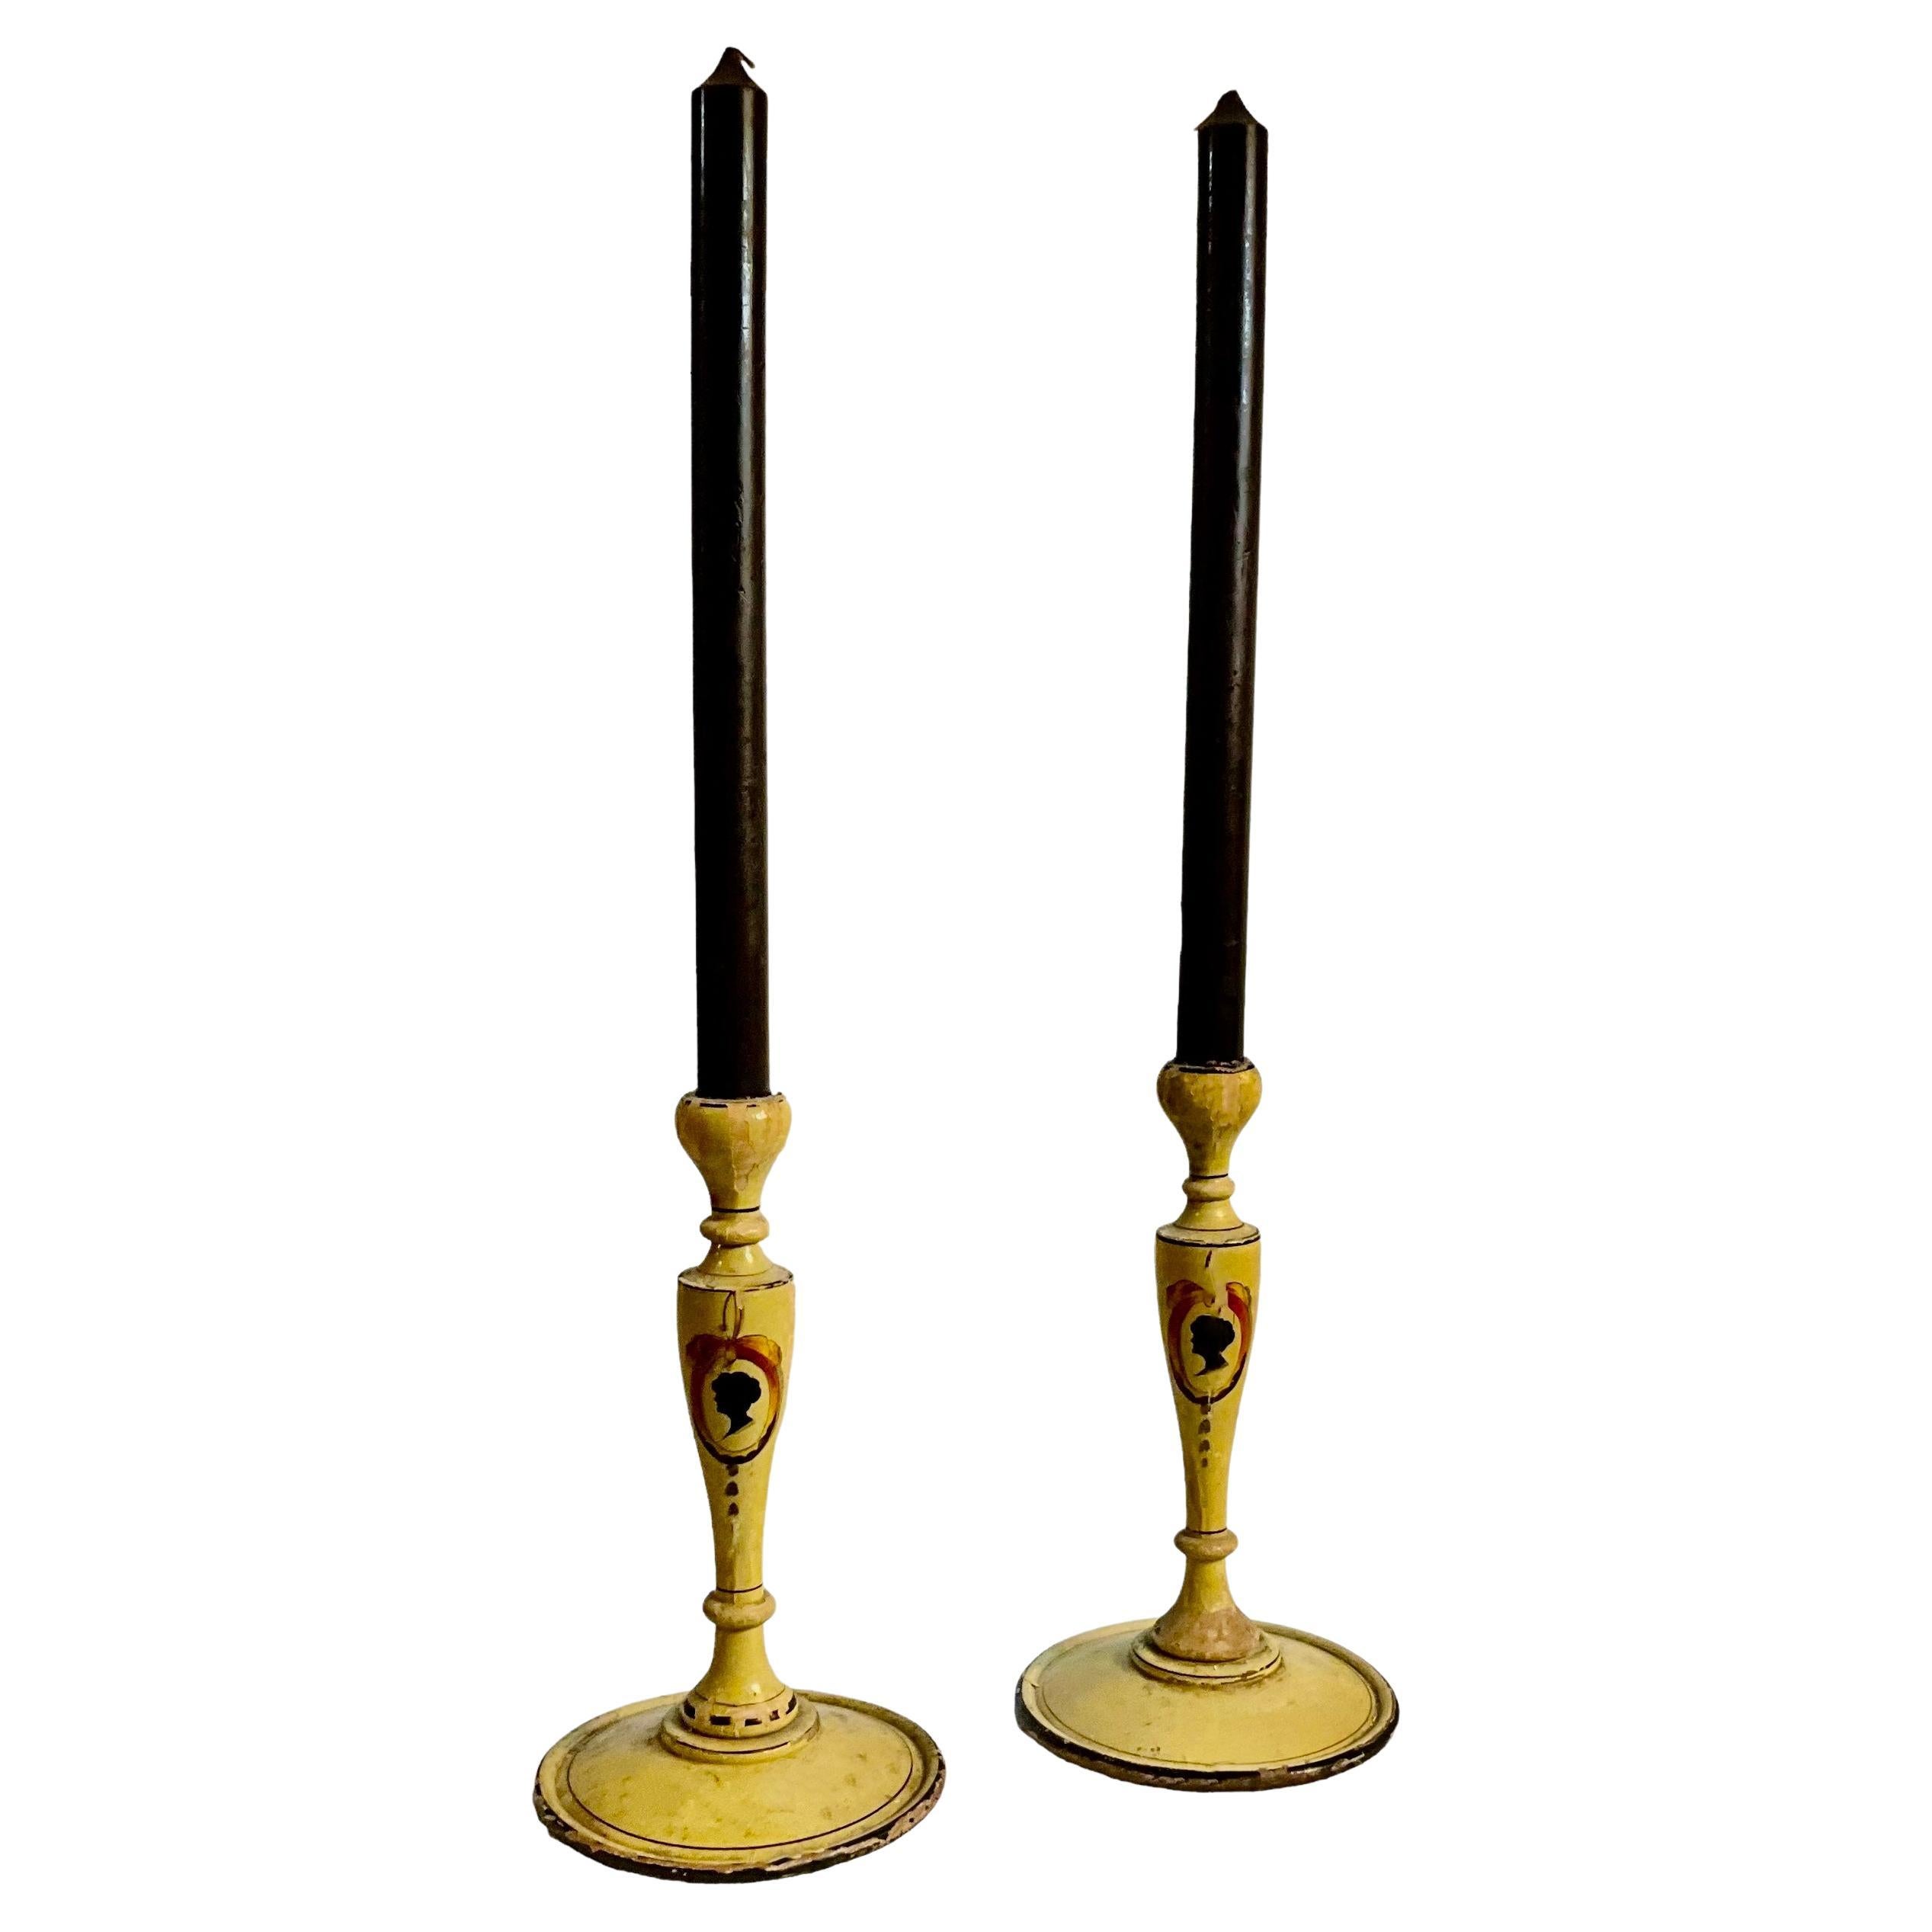 19th-C. French Carved Wood Tole Candlesticks W/ Silhouettes & Mustard Paint -2